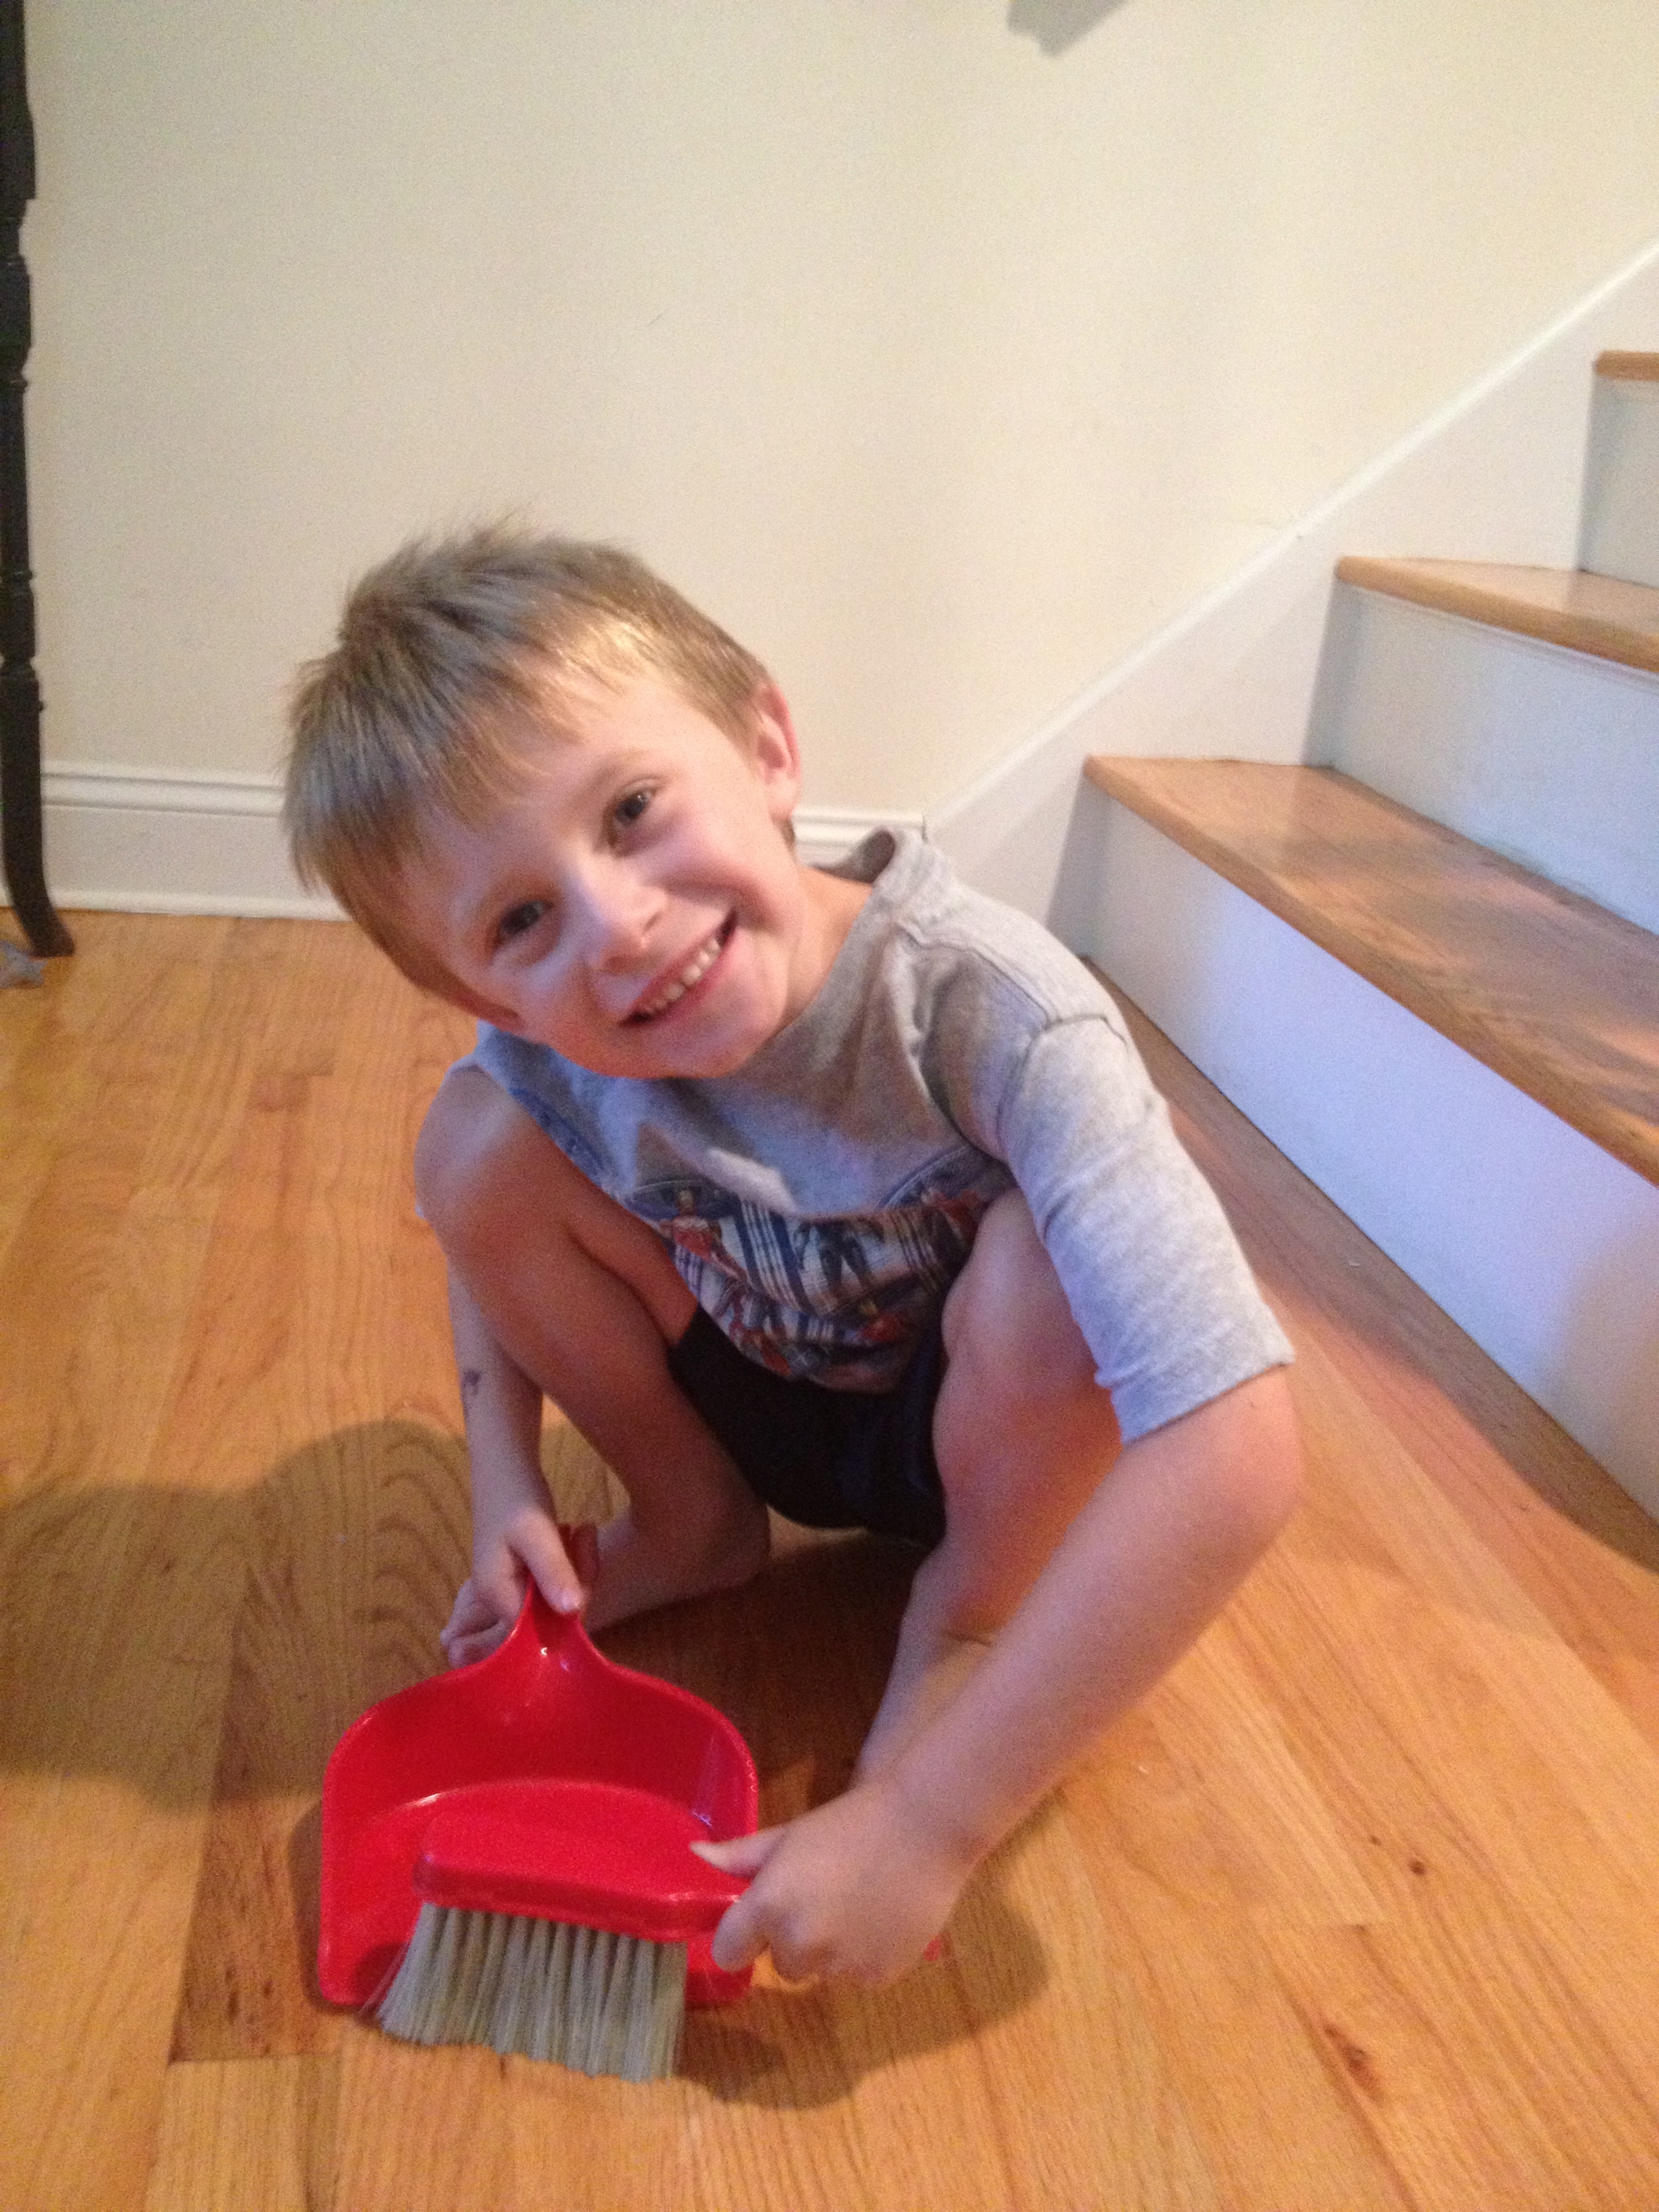 Kids are never too young to start chores. Sweeping a great way to get started!